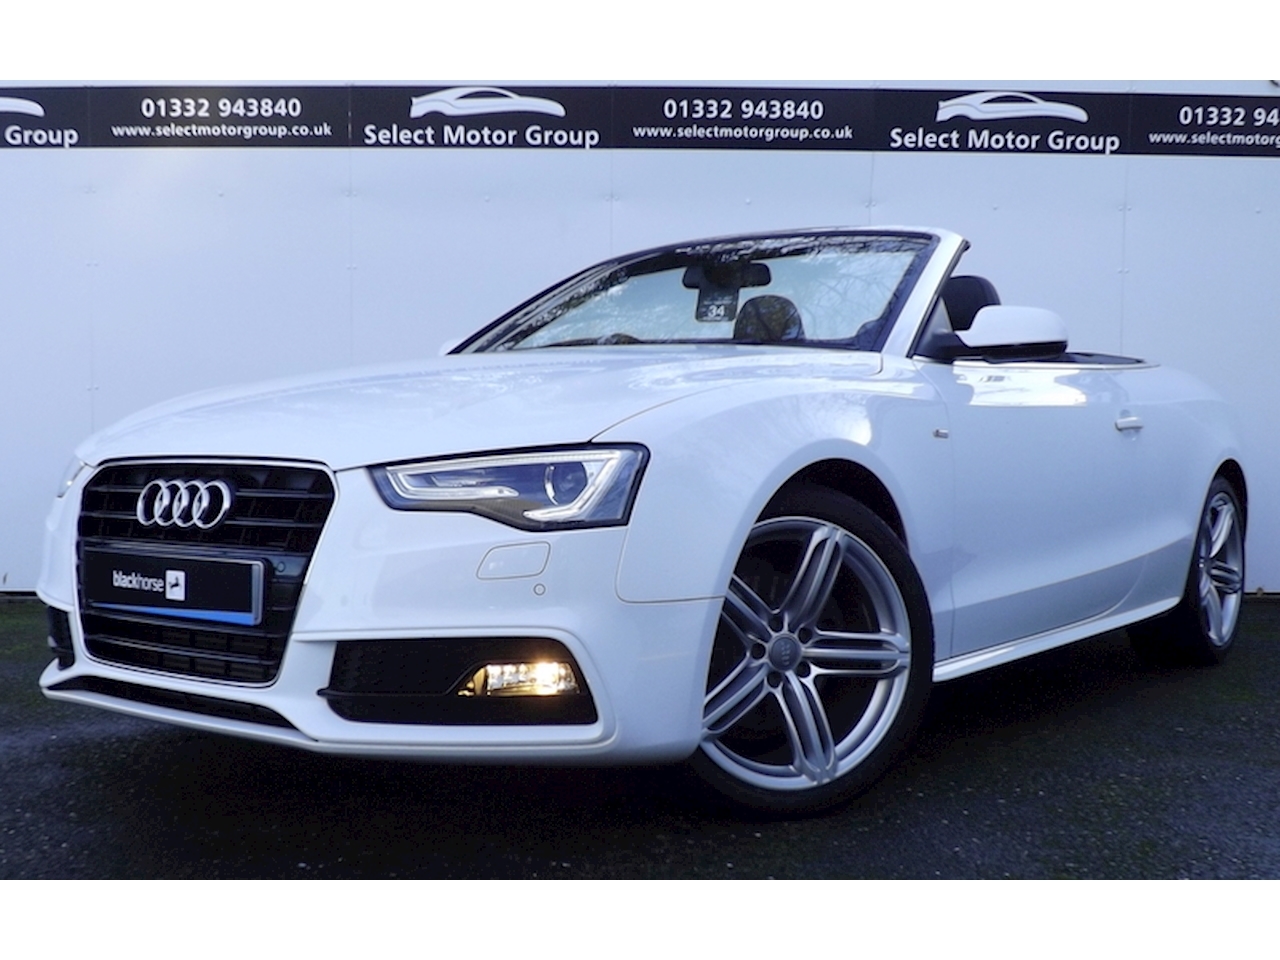 A5 2.0 TDI 177 S line Special Edition Cabriolet Multitronic Diesel